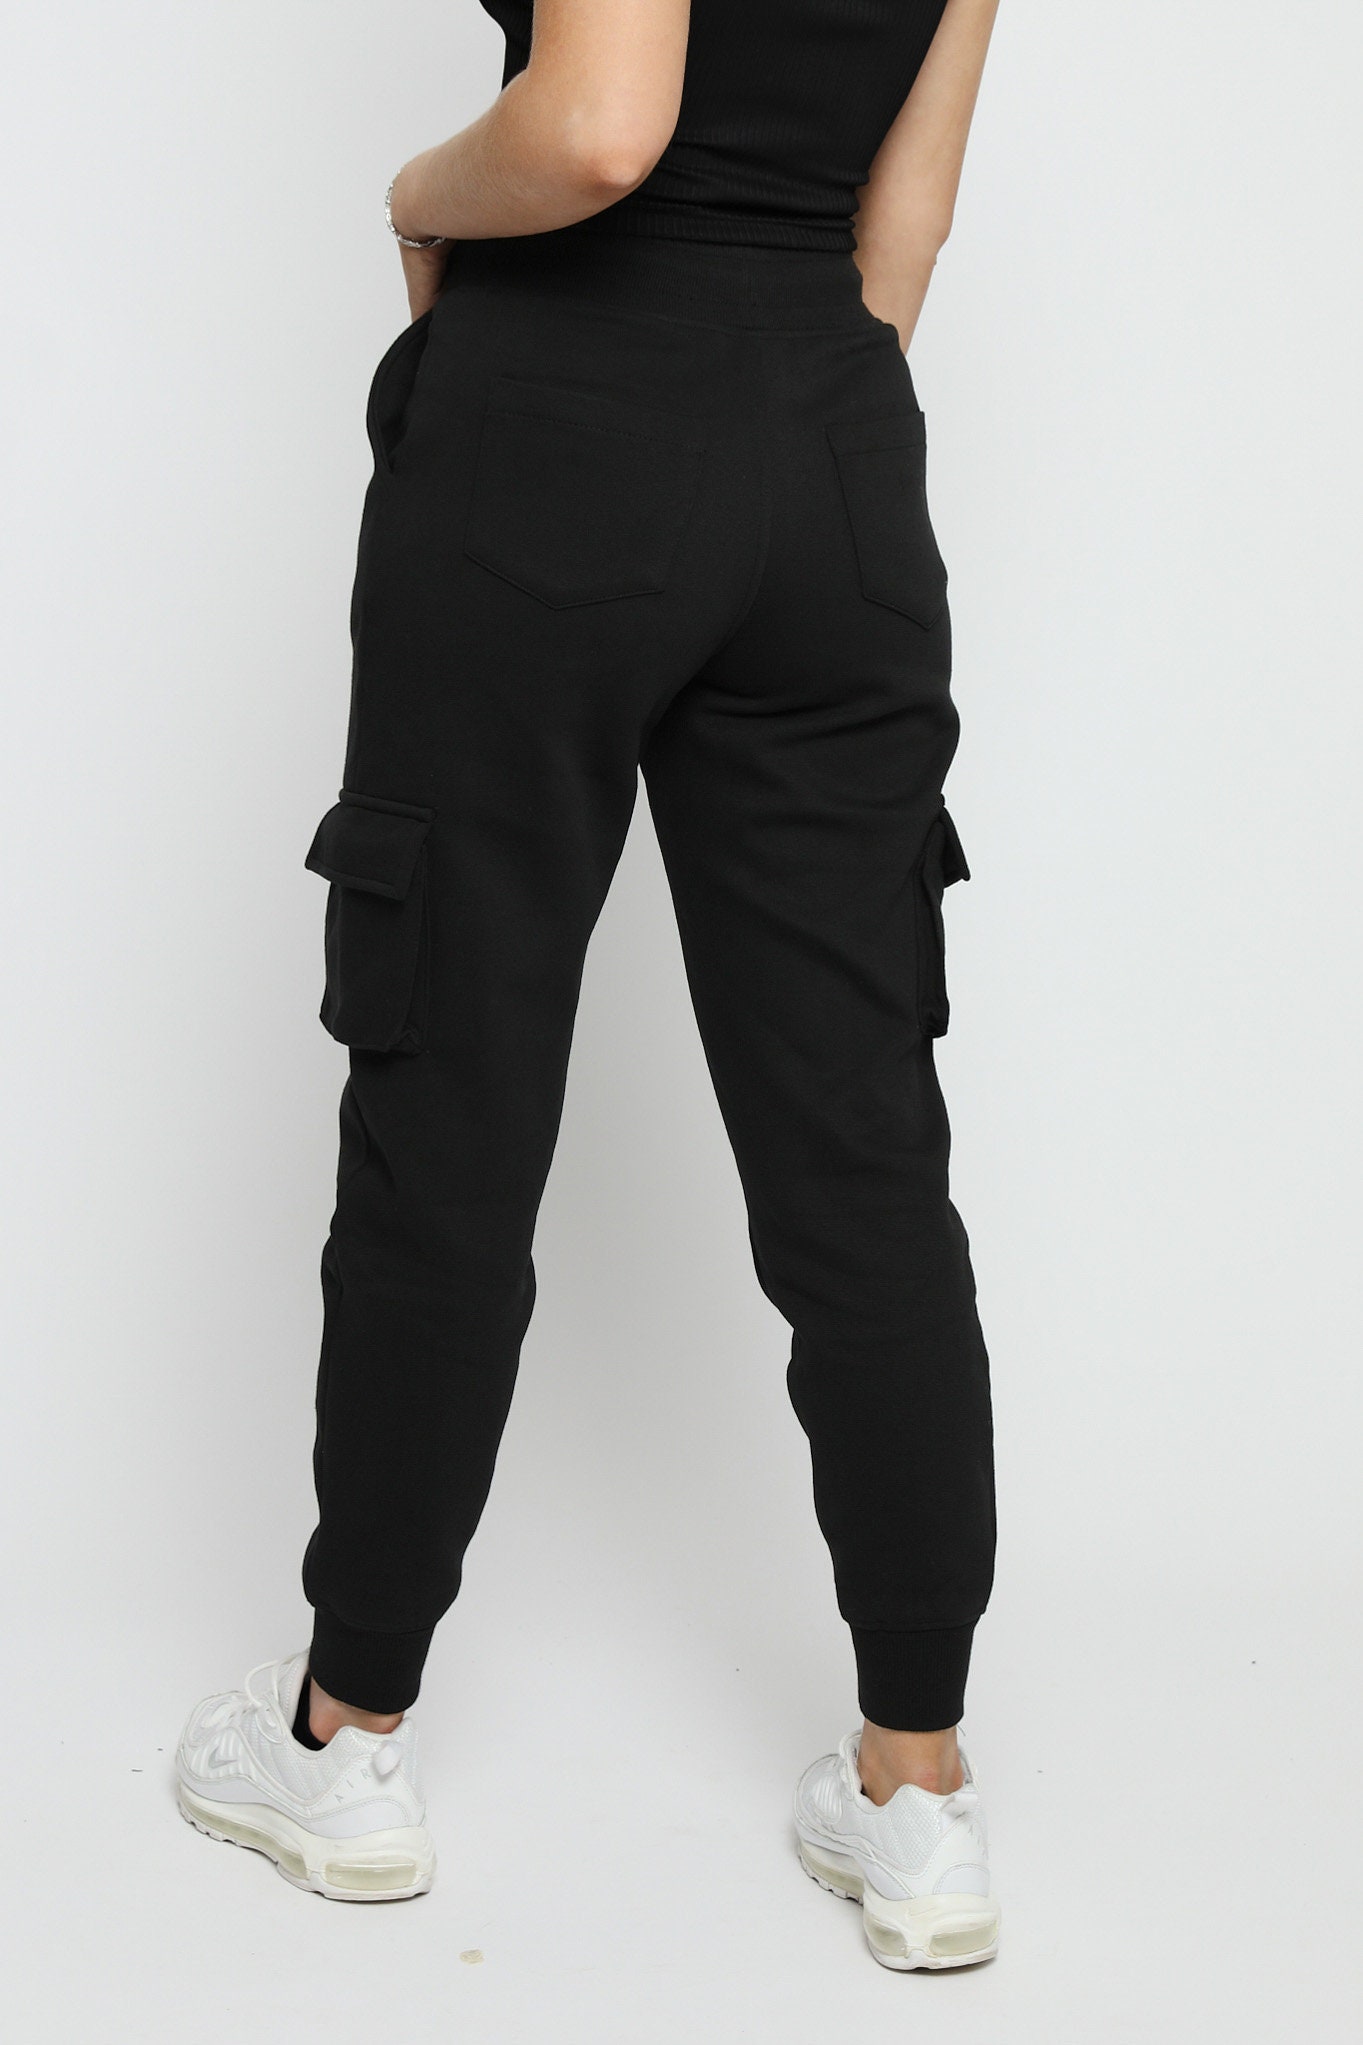 Trousers Women Tapered Pocket Black Joggers Cargo Trousers Gift for Women -   Canada